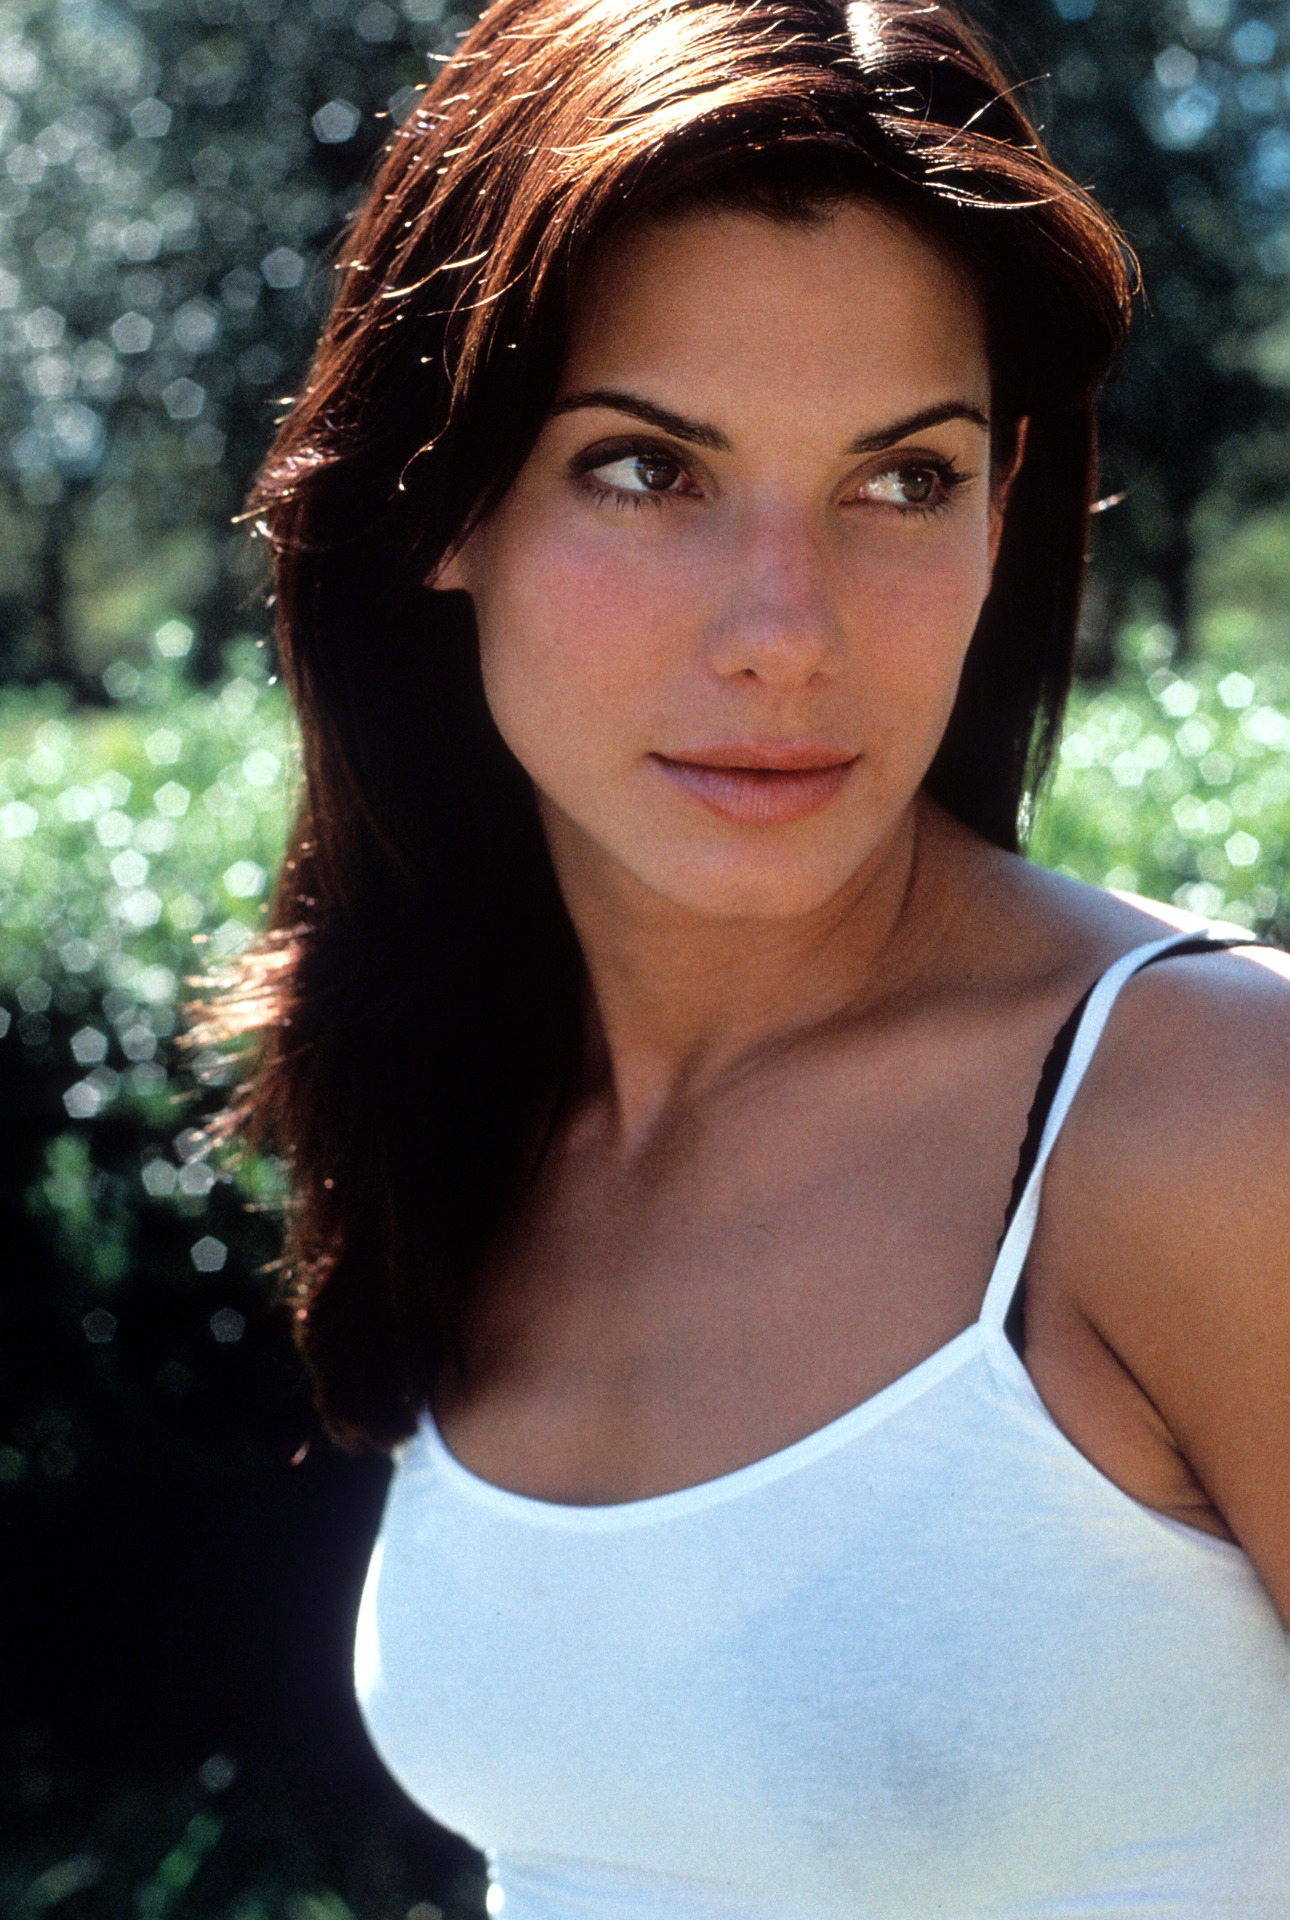 Photos from past 25 years are incredible proof Sandra Bullock doesn't age - NZ Herald